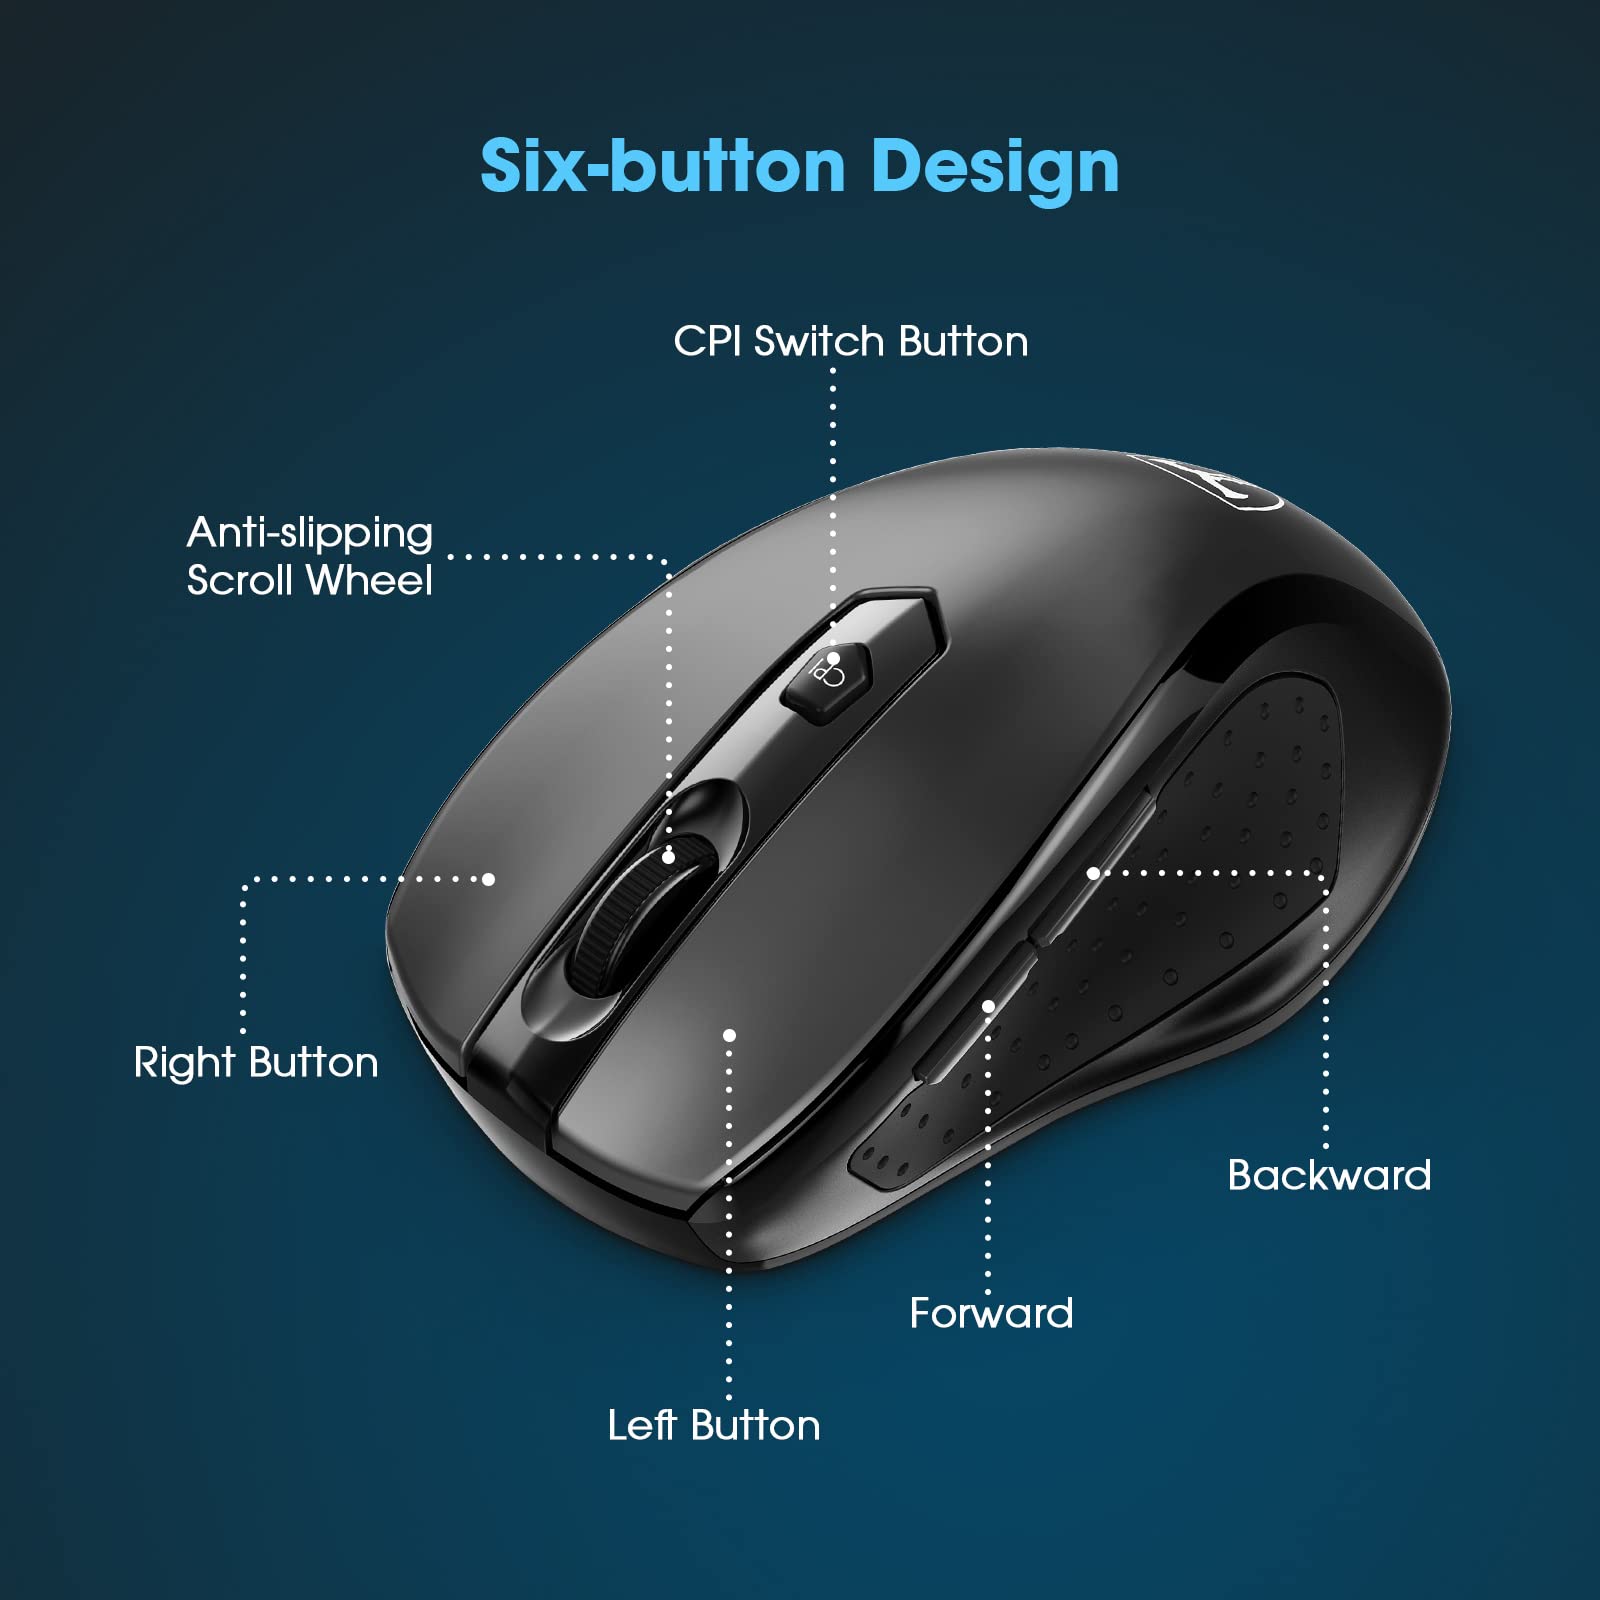 Lionsing Wireless Mouse ,2.4GHz Optical Computer Mouse with USB Receiver, 5 Adjustable DPI Levels, 6 Buttons Cordless Mouse for Laptop , PC, Computer, Desktop,Notebook,Macbook,Chromebook , Black